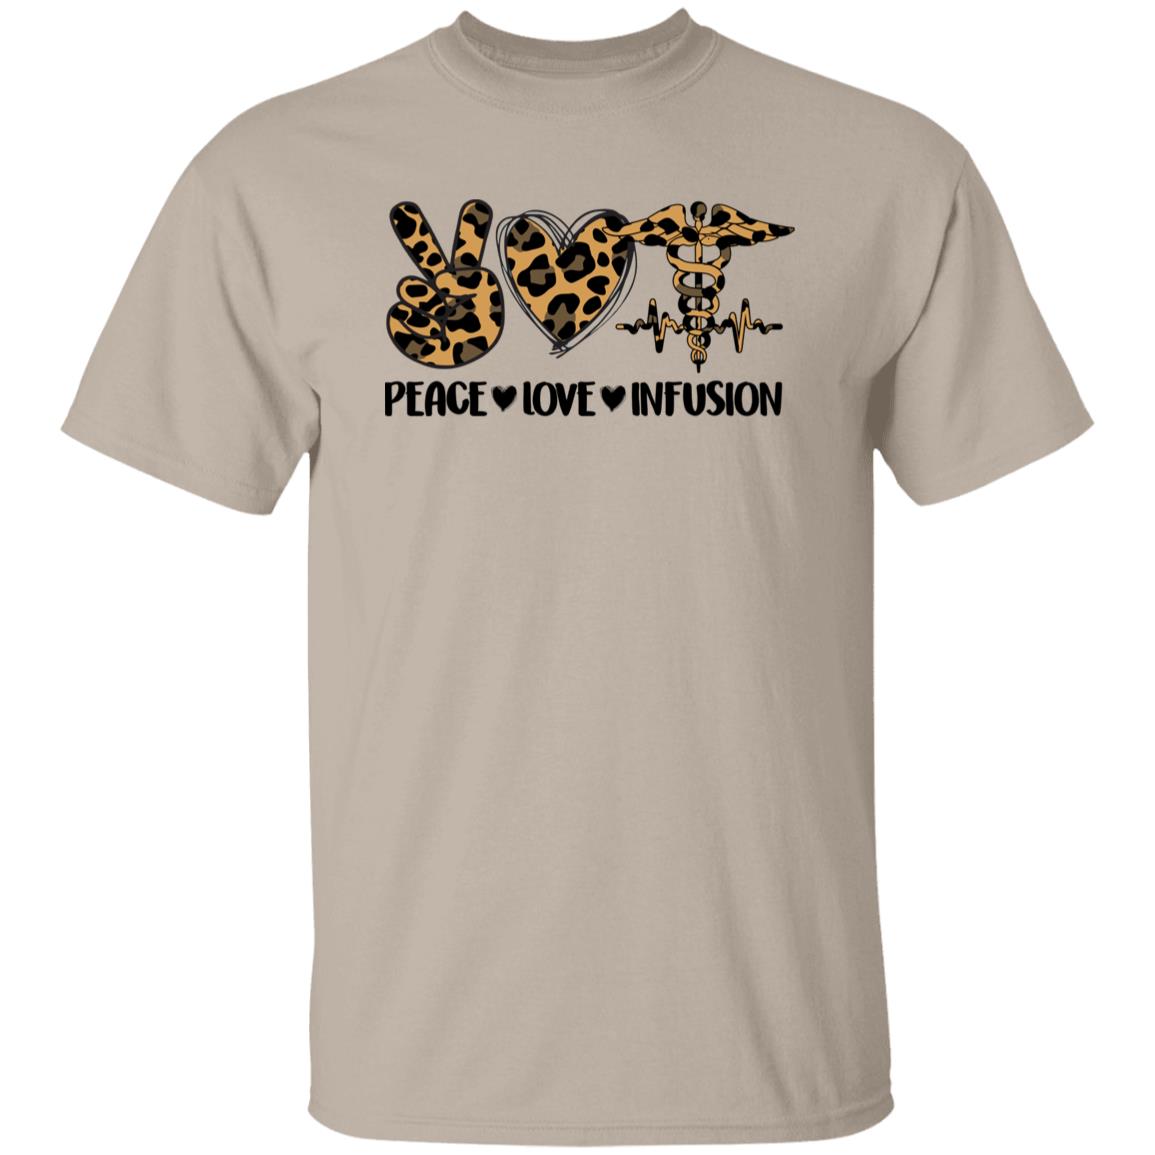 Peace Love Infusion T-Shirt Leopard skin Oncology Infusion Nurse Unisex Tee Sand White Sport Grey-Family-Gift-Planet